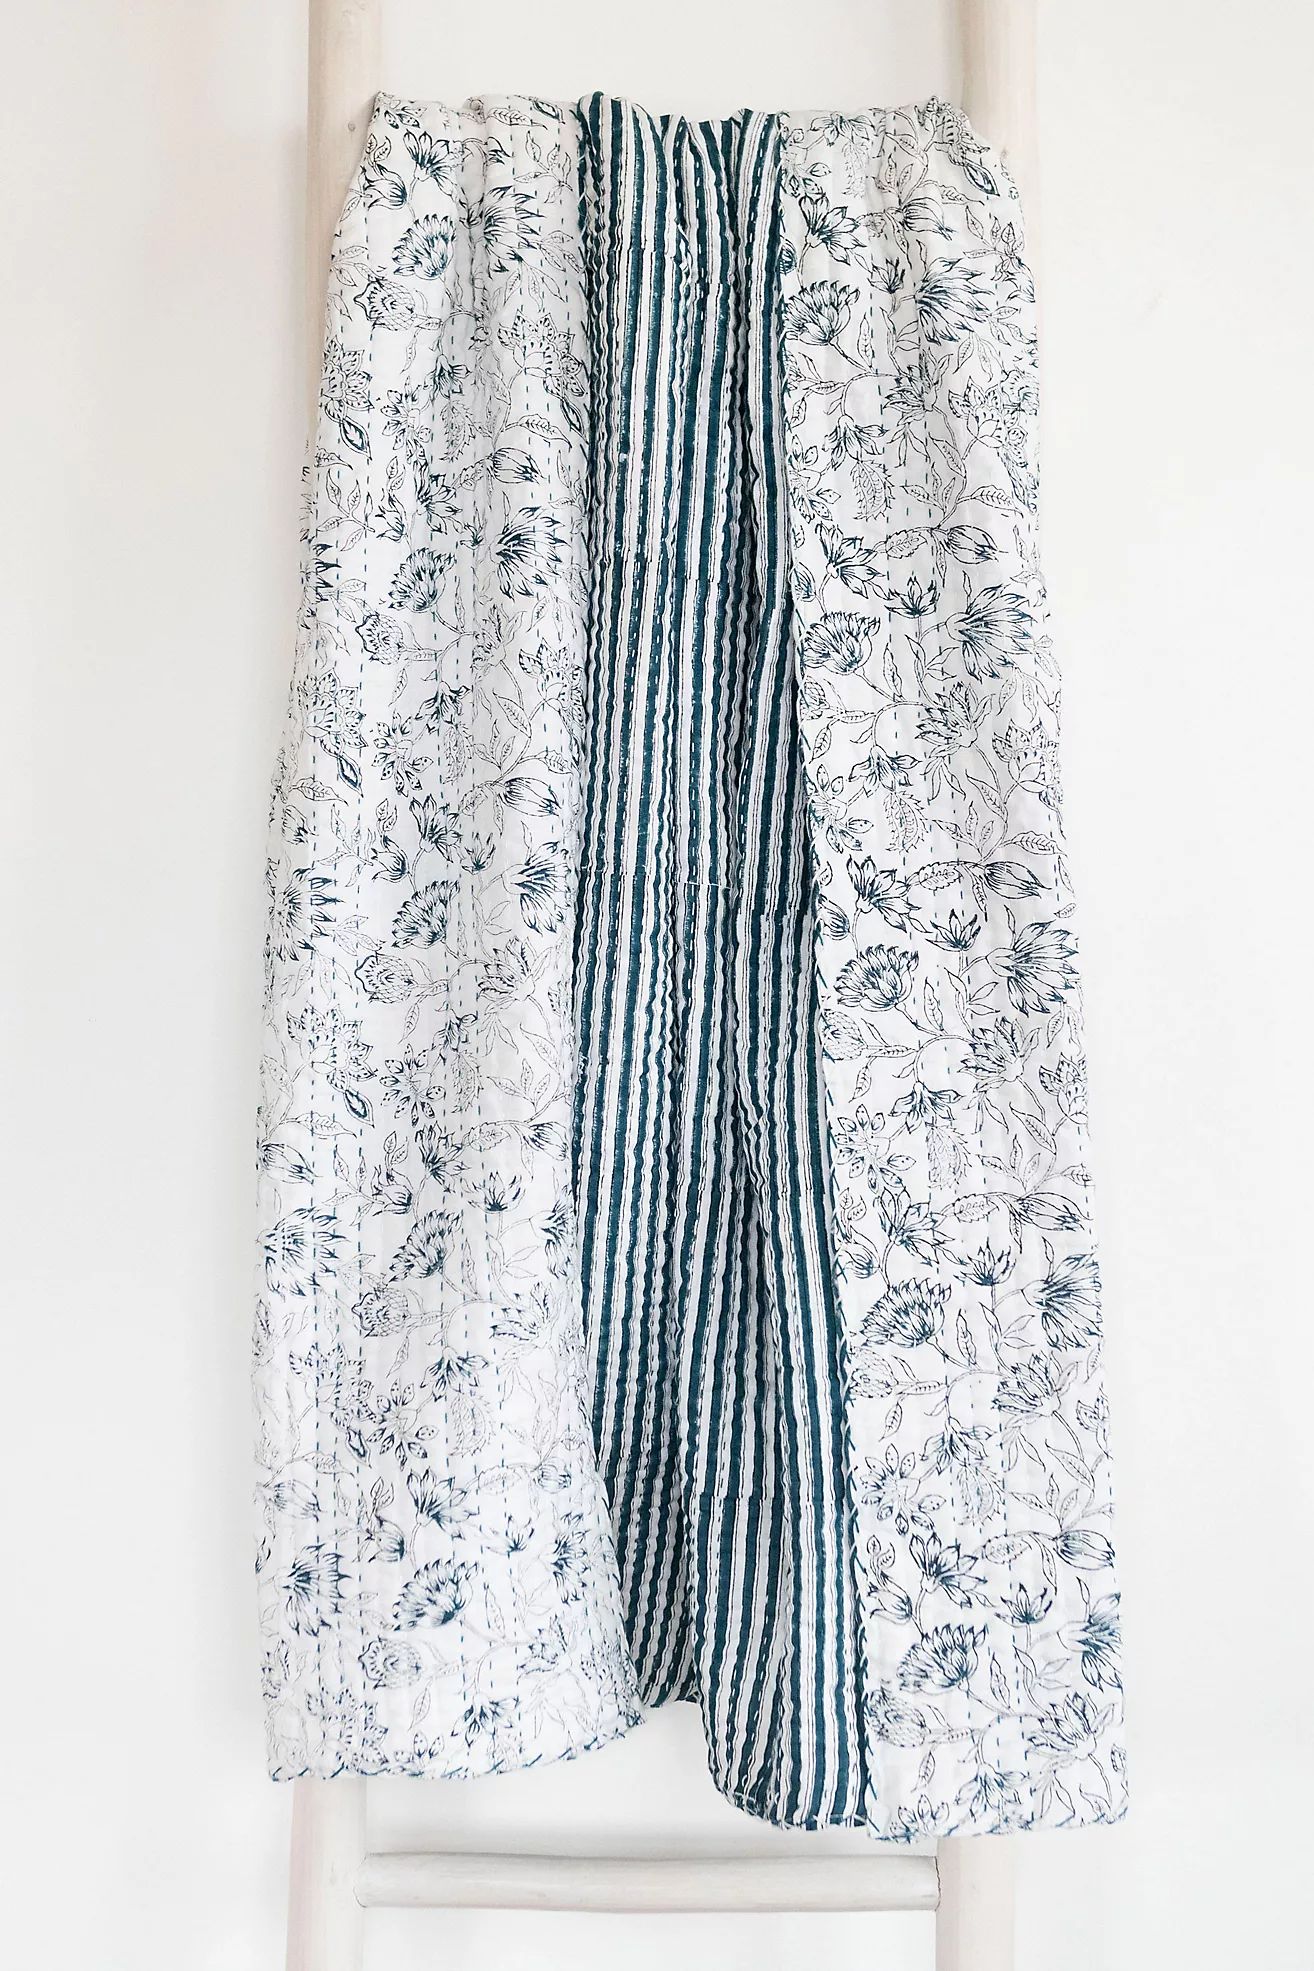 Connected Goods Kantha Quilt No. 0425 | Anthropologie (US)